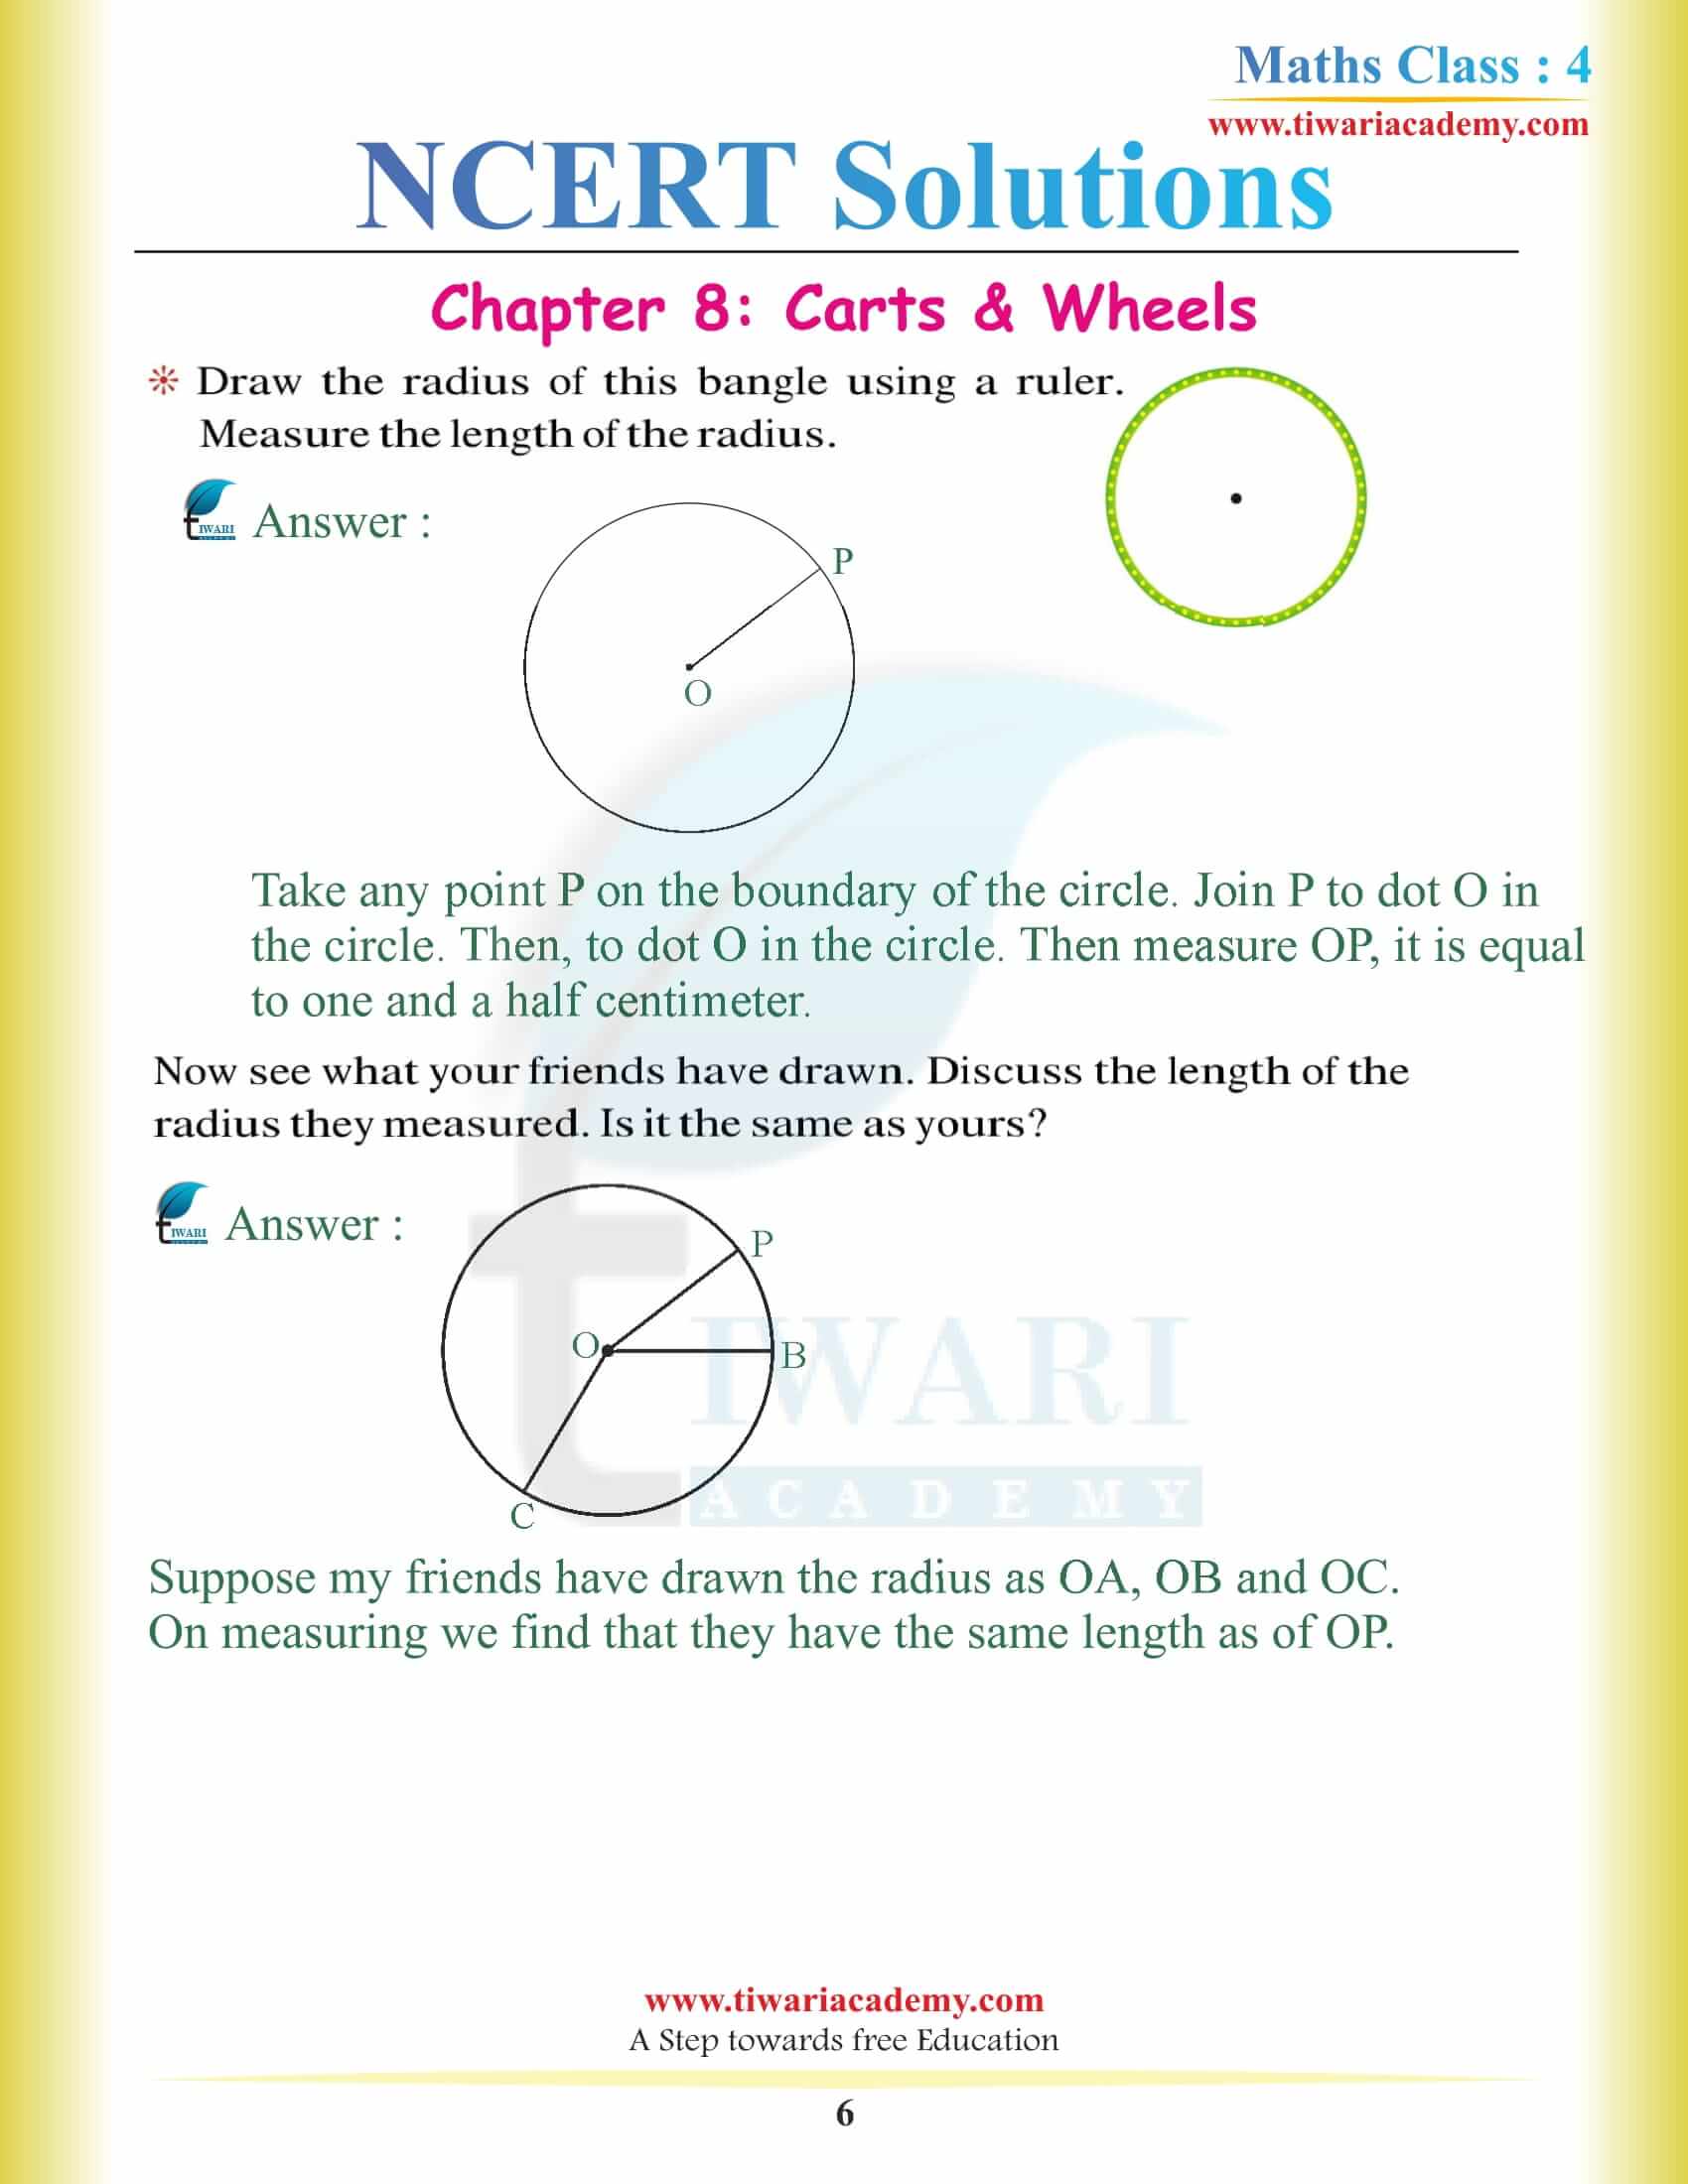 NCERT Solutions for Class 4 Maths Chapter 8 free pdf English